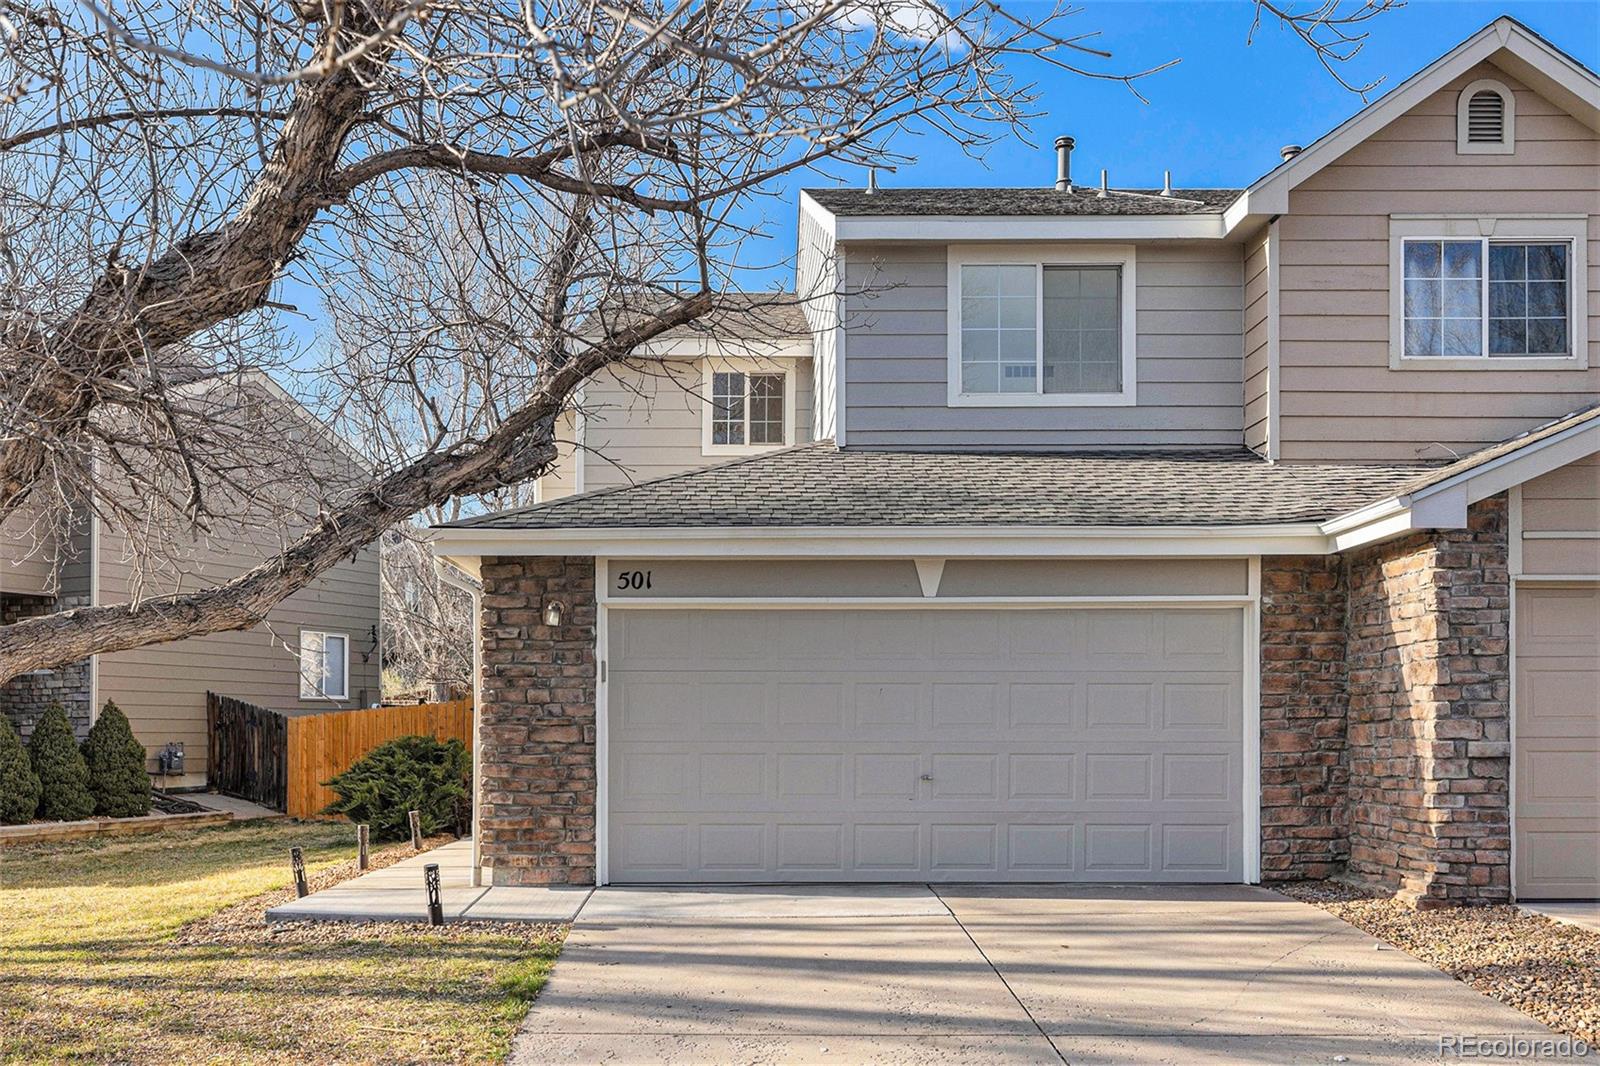 501 w 91st circle, thornton sold home. Closed on 2024-04-30 for $451,000.